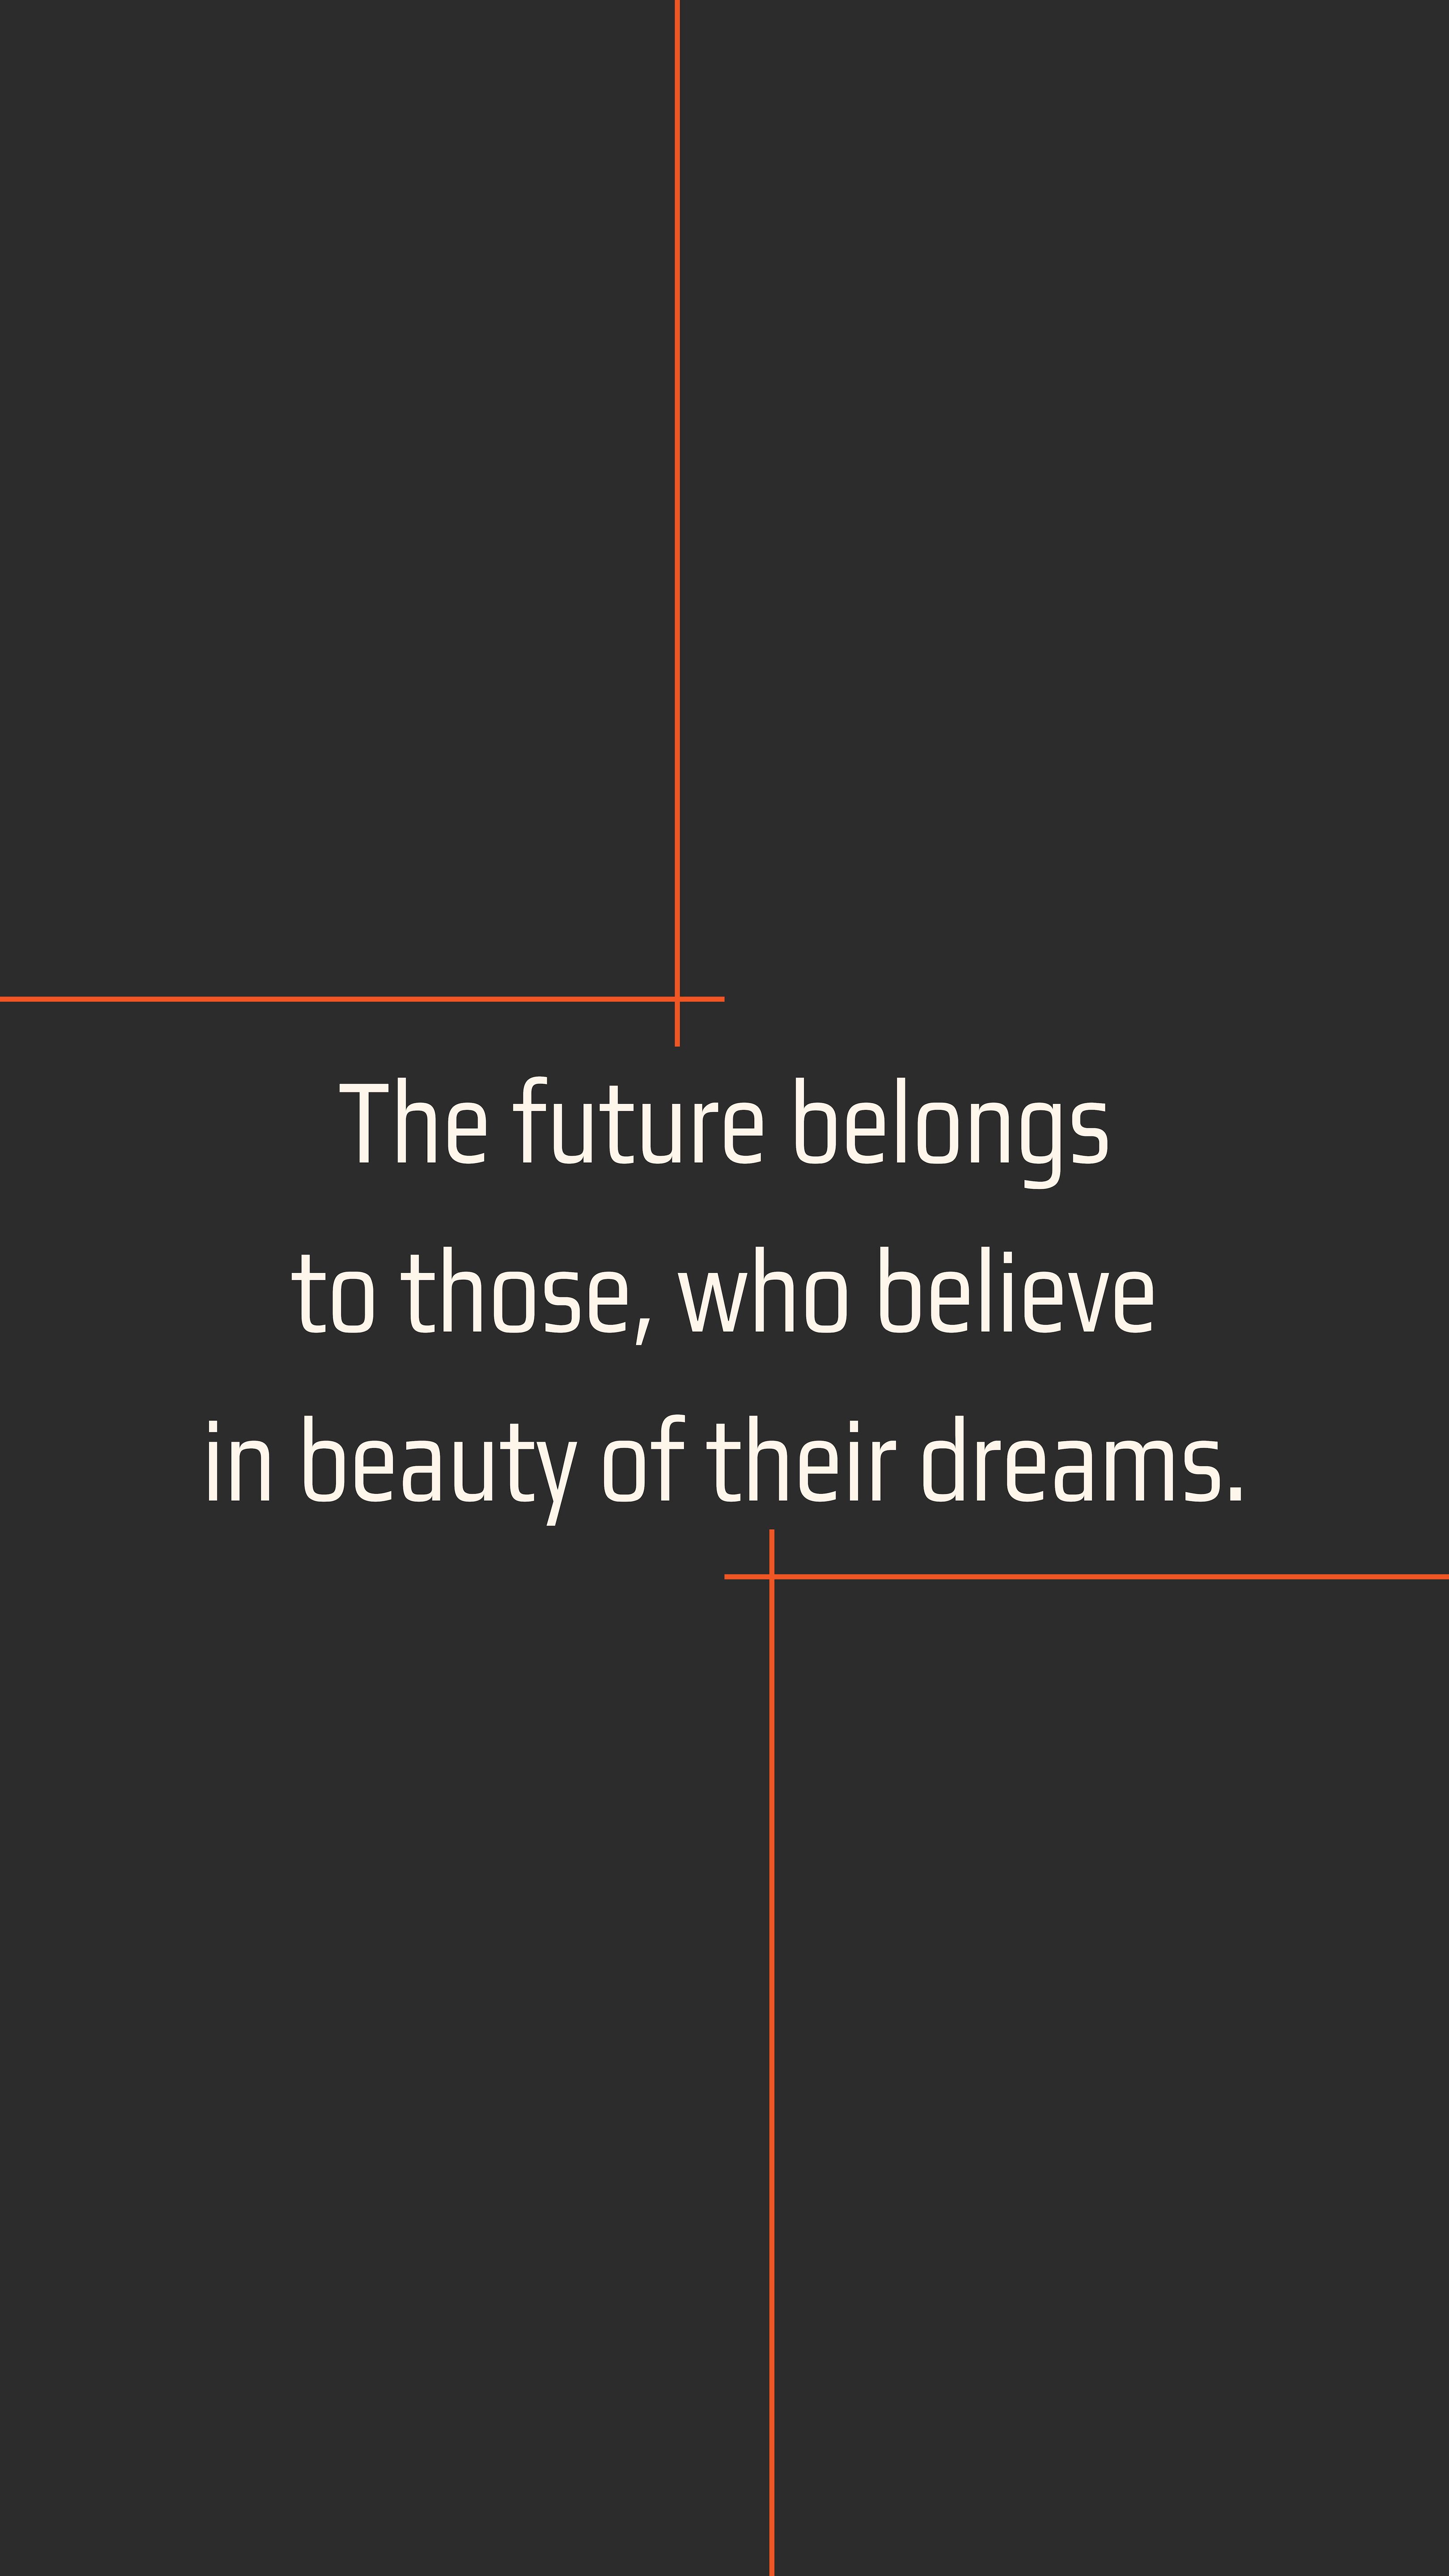 android motivation, inspiration, life, words, future